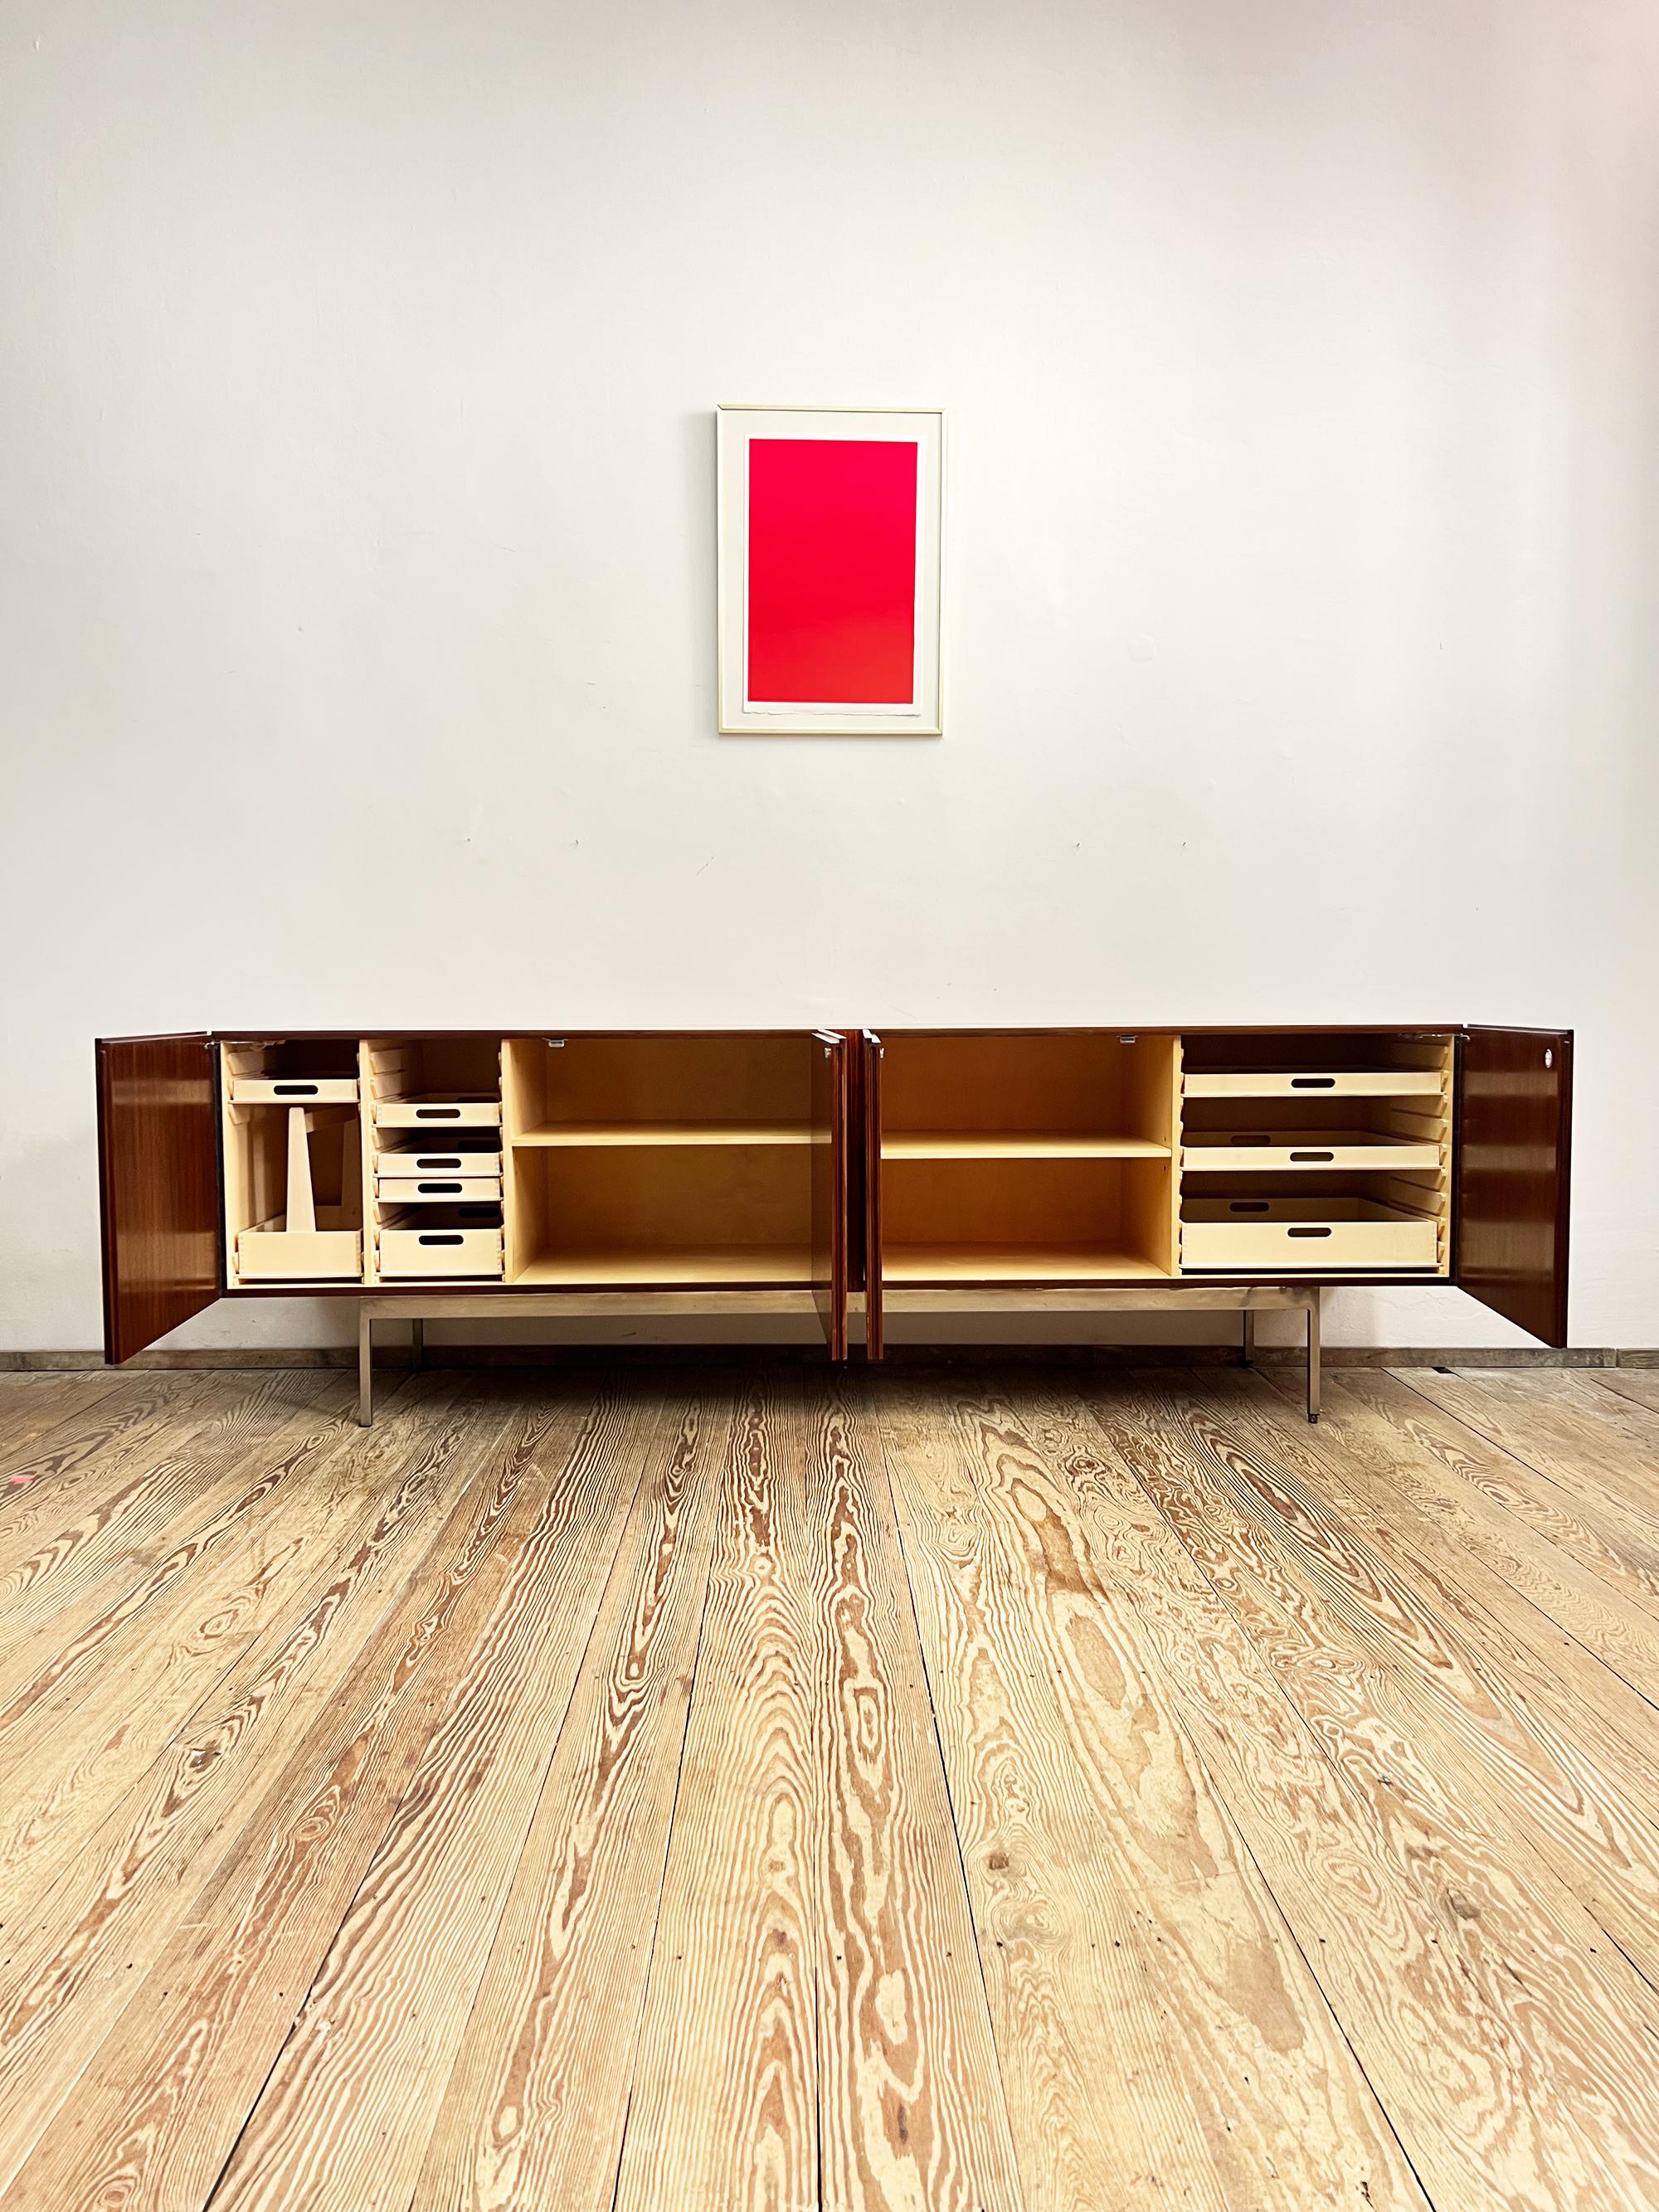 Dimensions 248x56x80 cm (WxDxH)

Elegant Dieter Wäckerlin sideboard in veneer with a strong yet regular grain. The minimalist sideboard sits on a chrome coated metal base with an inlay made out of maple. The credenza comes with lots of storage